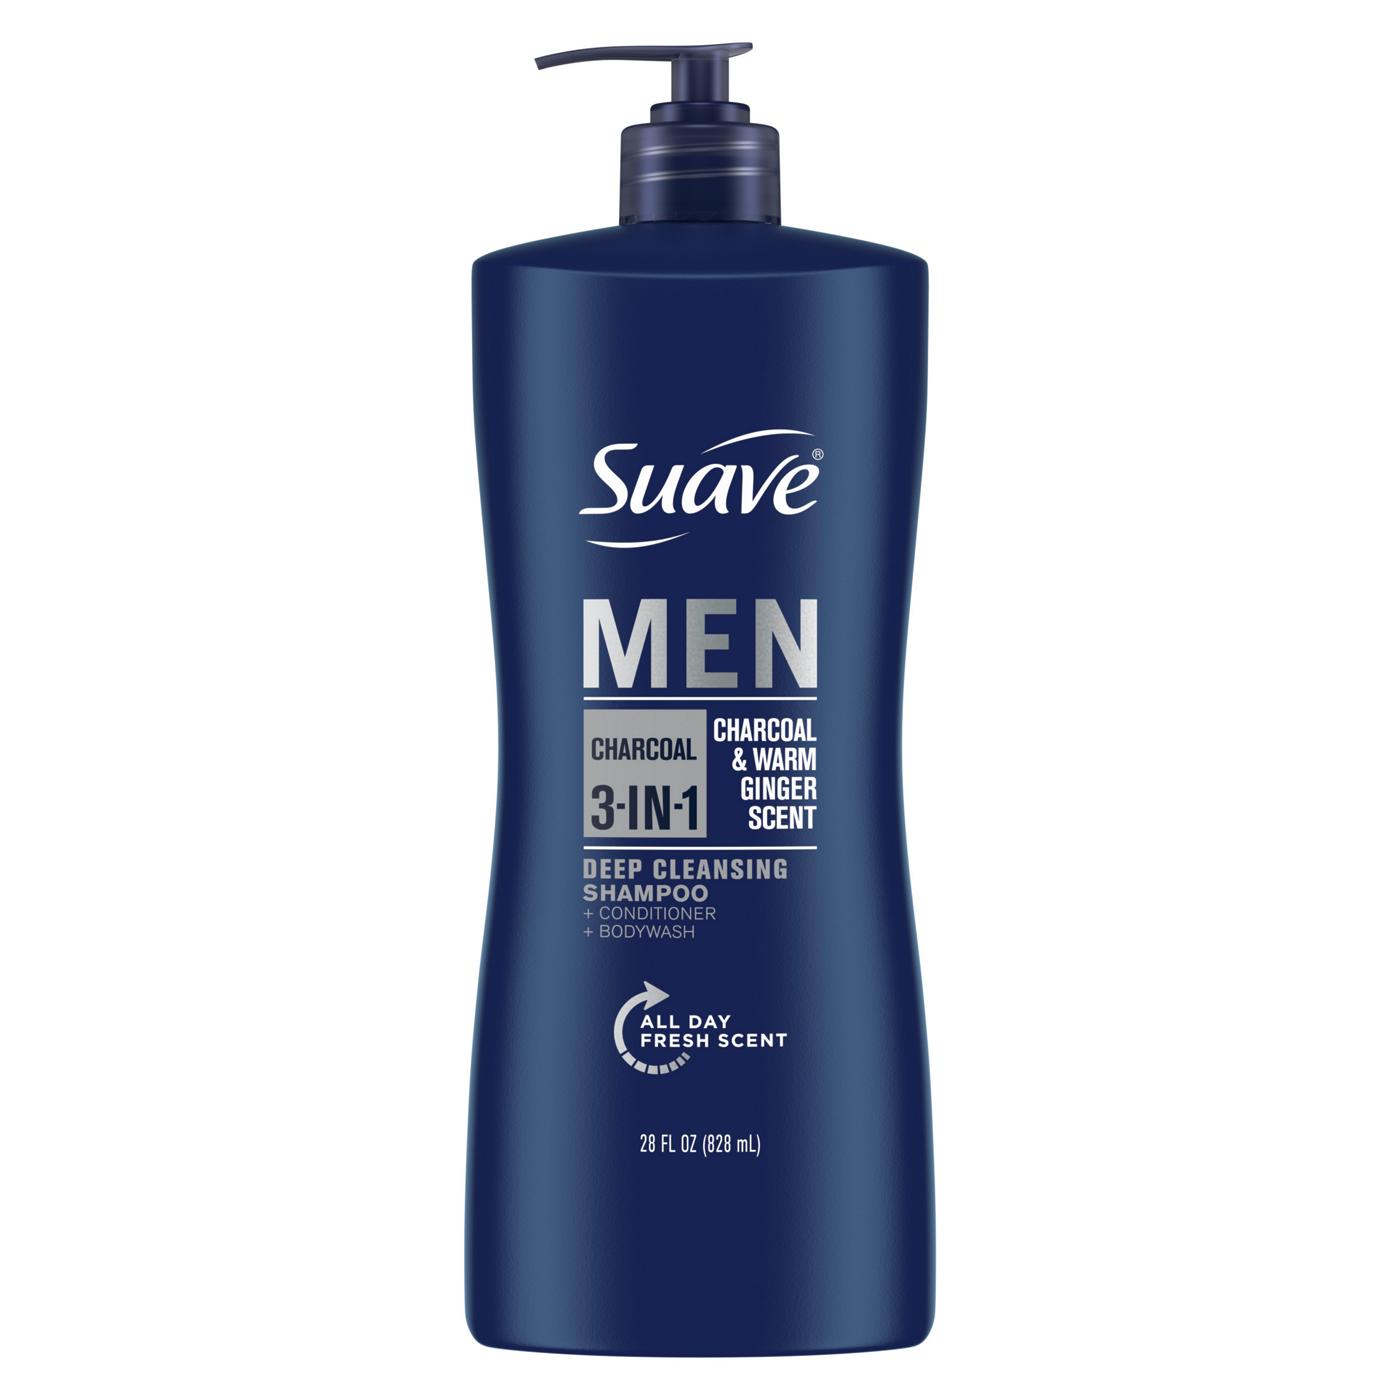 Suave Men 3-in-1 Shampoo Conditioner and Body Wash Infused with Charcoal; image 1 of 12